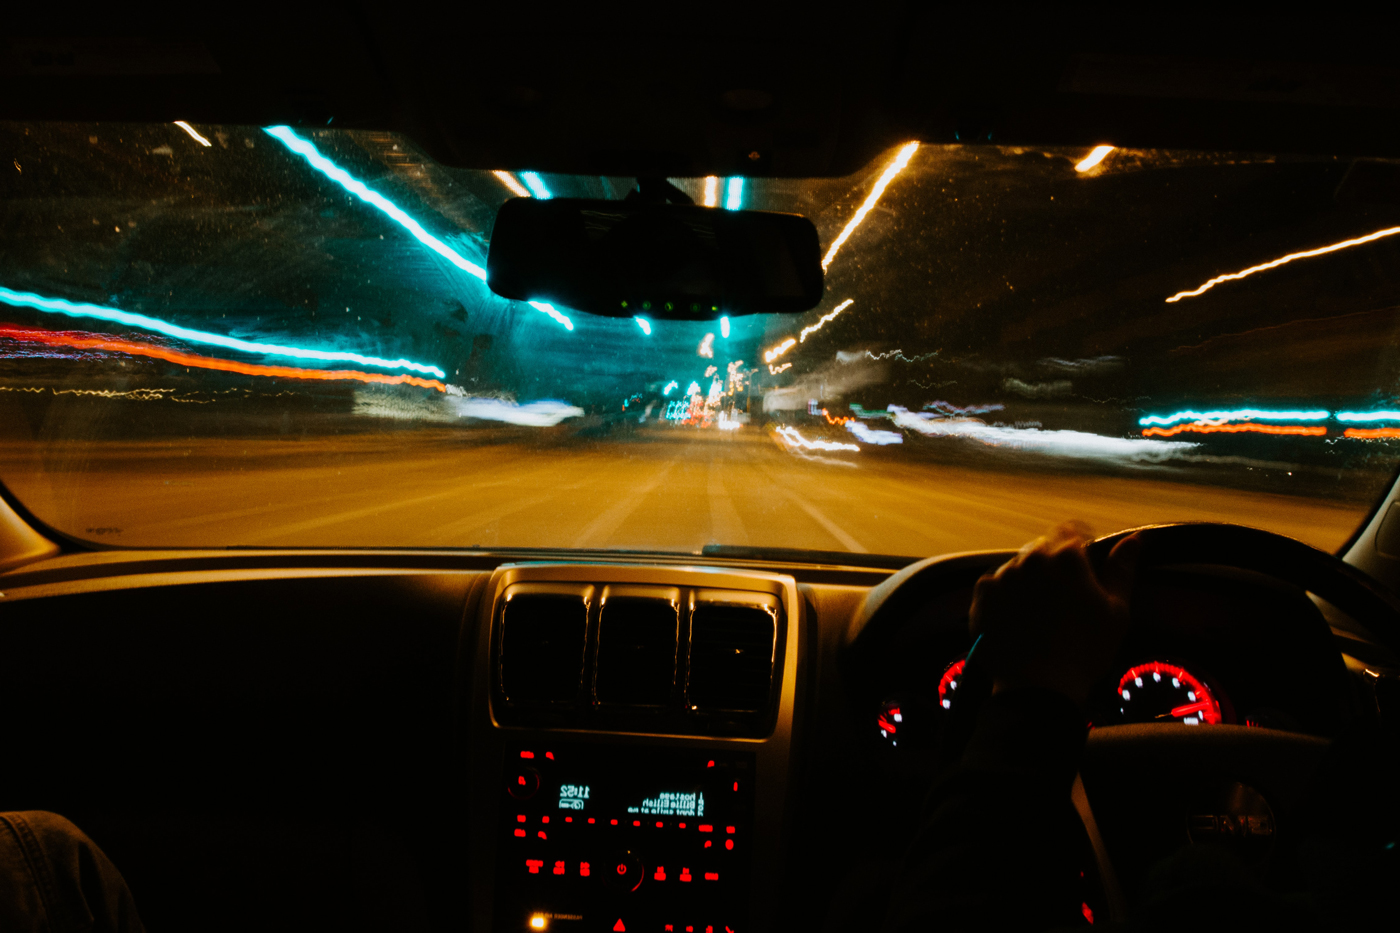 A view from the inside of a car as the road and lights in front are blurred indicating intoxication